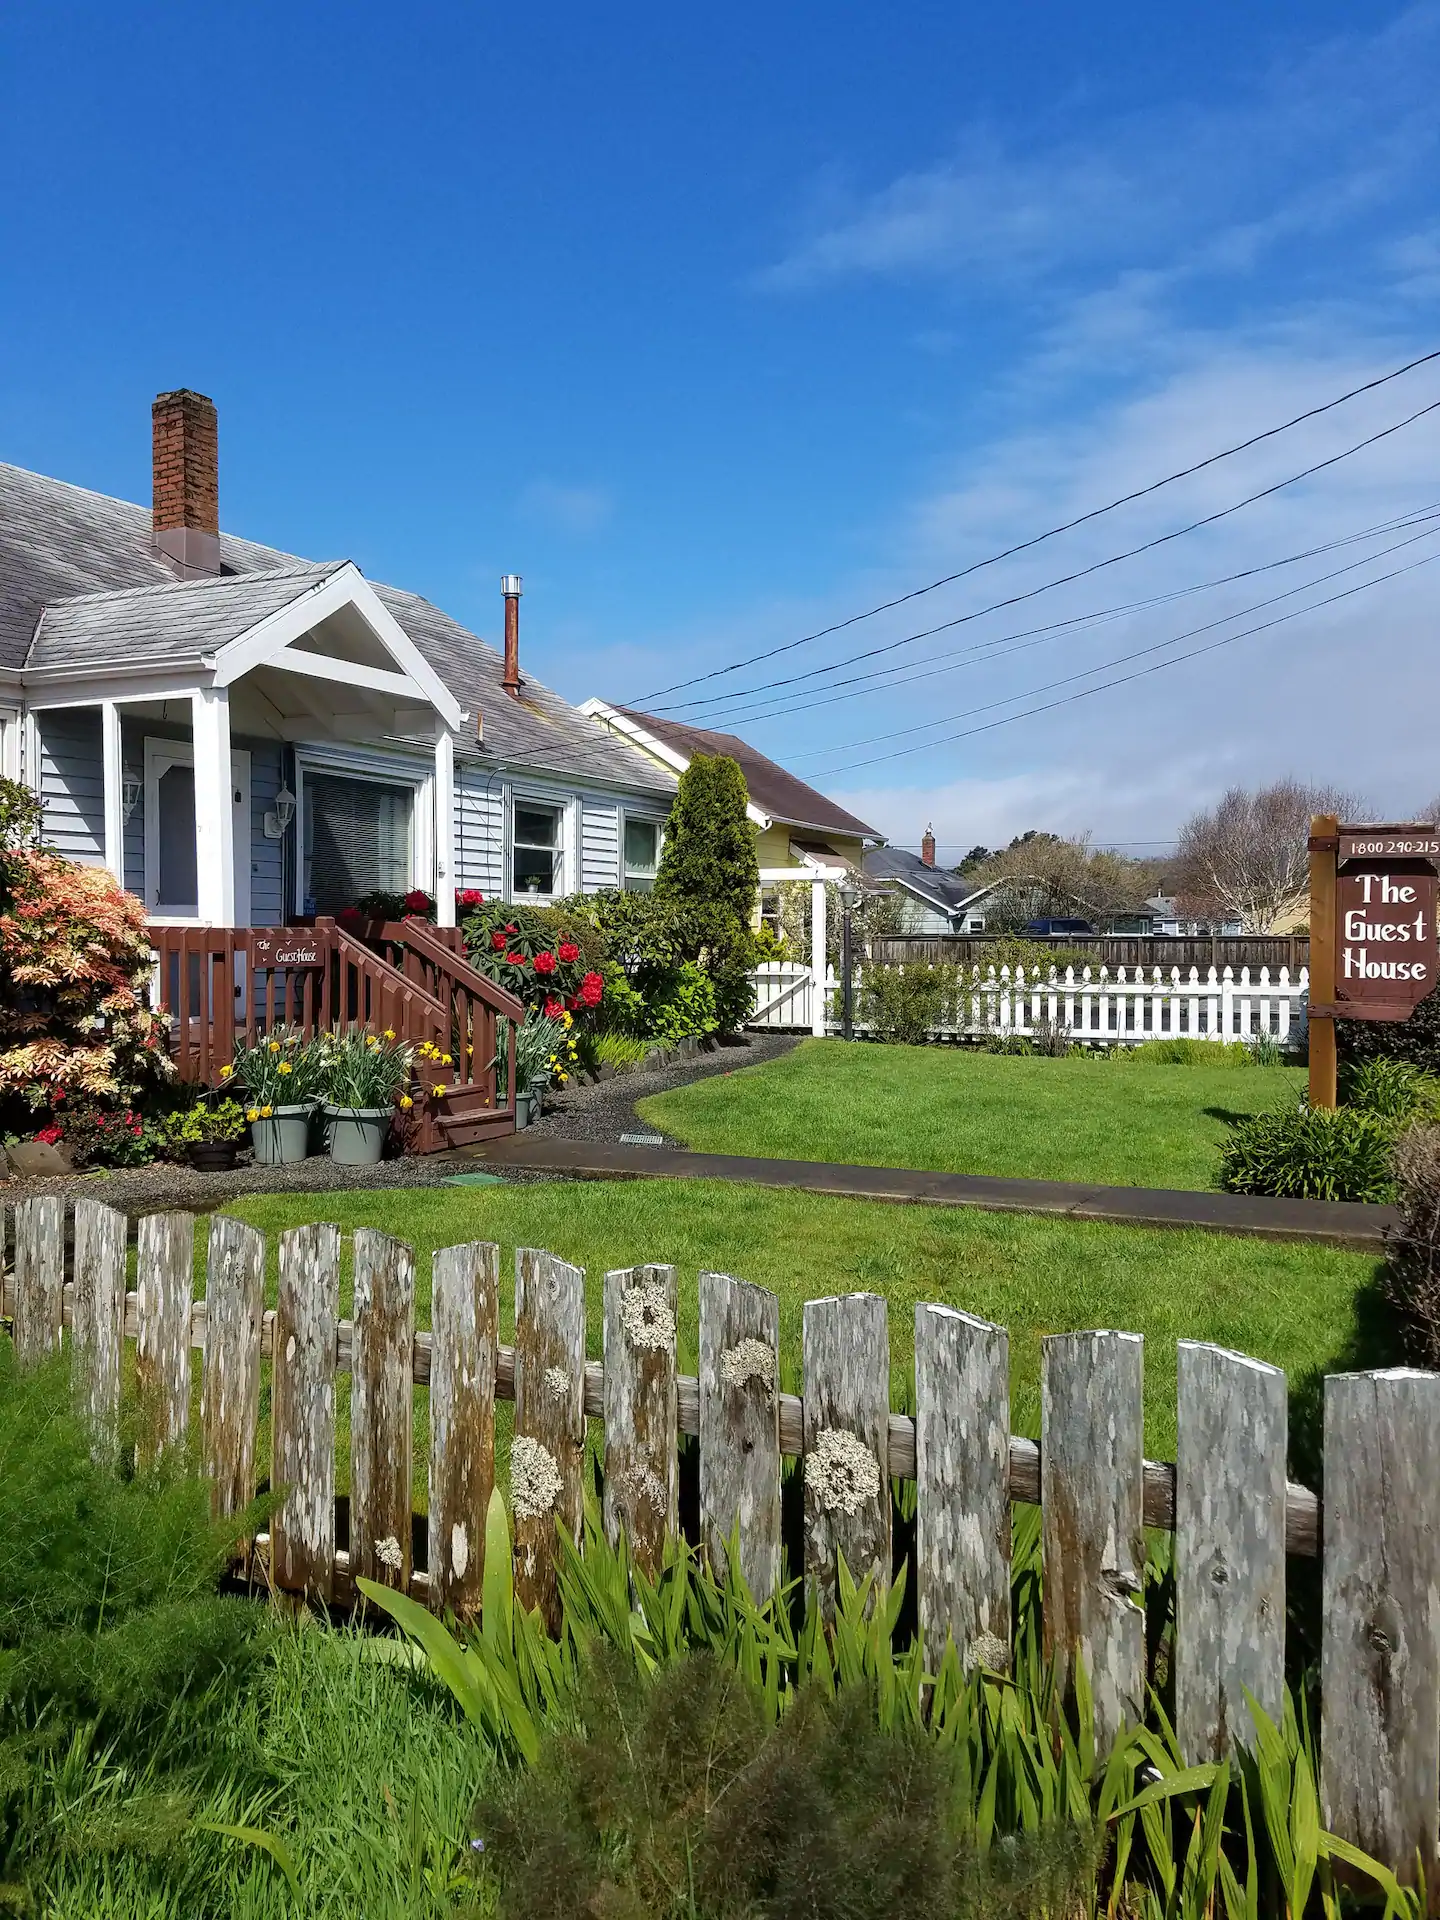 Front view of the Guest House, a fenced in getaway located in Cannon Beach